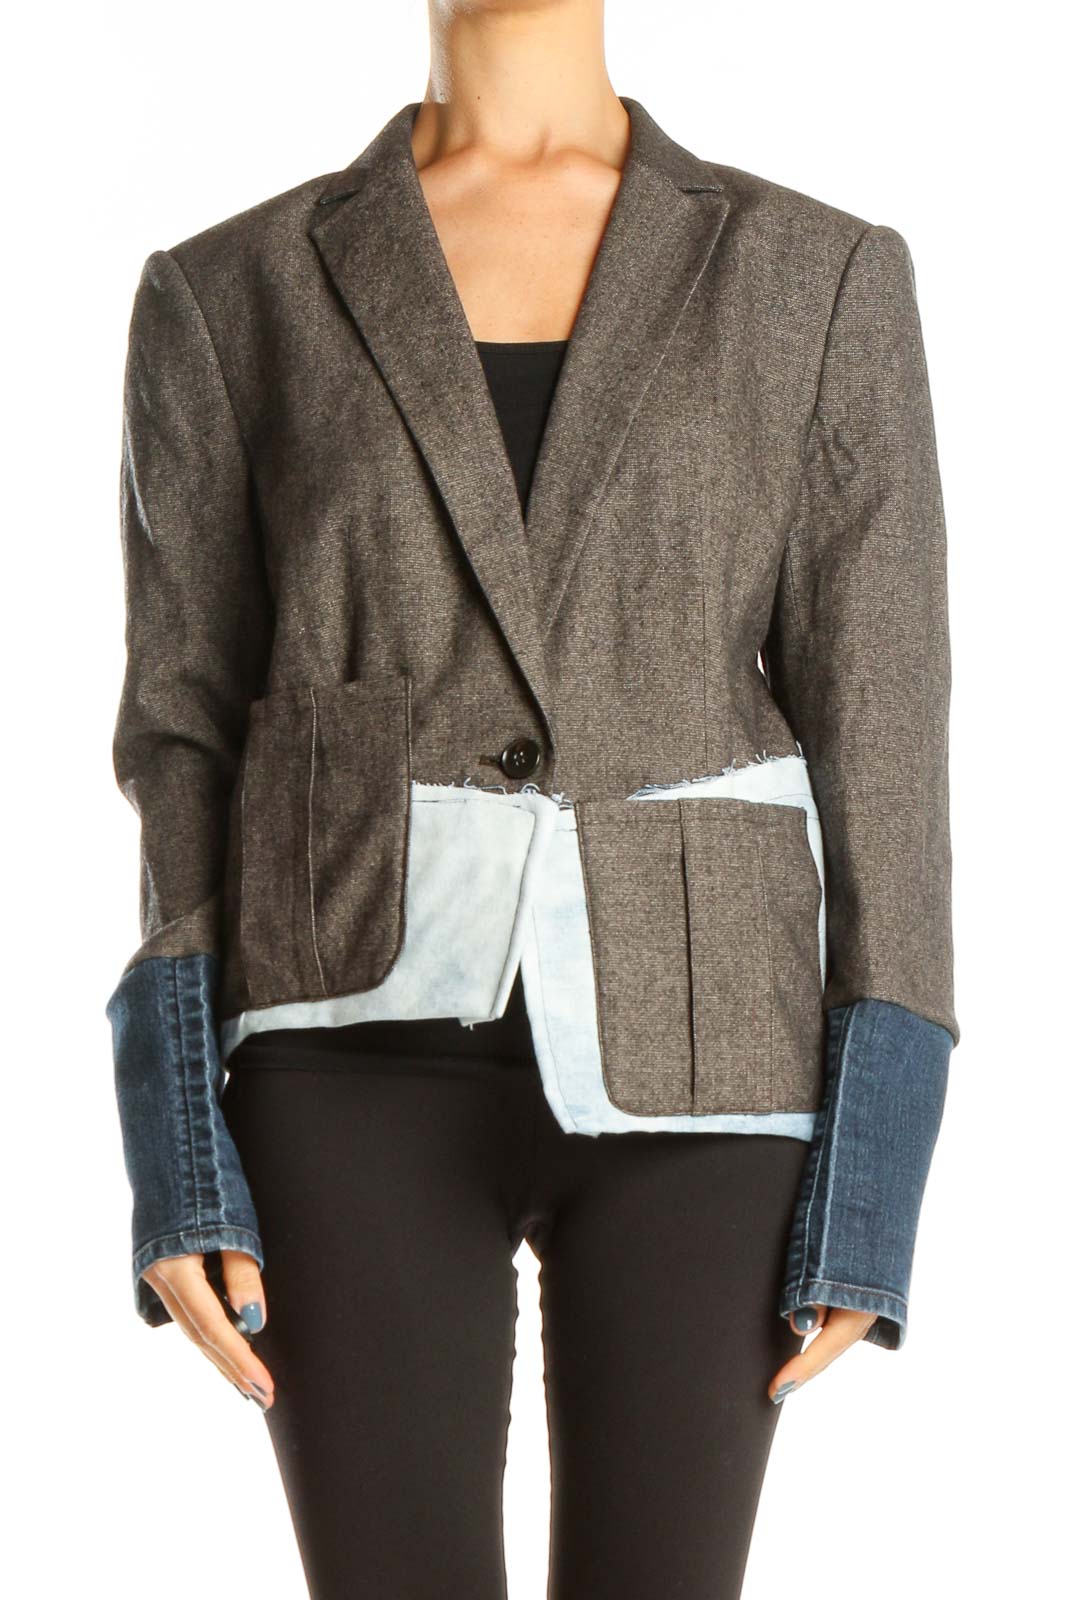 Reworked: Back to work cropped jacket with denim Front